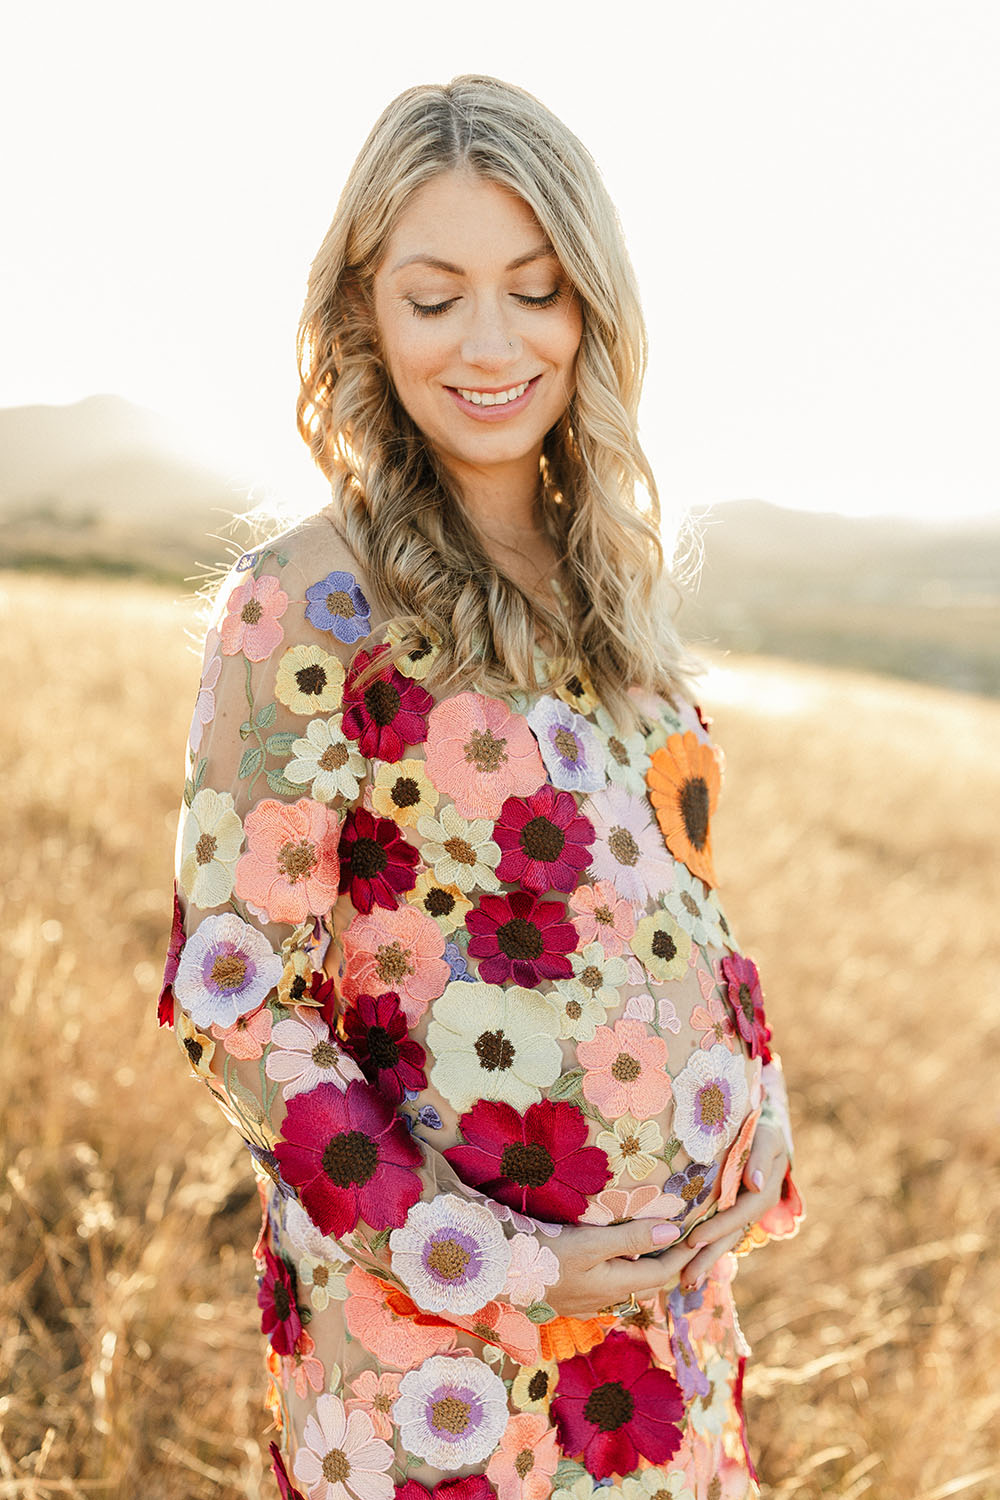 Floral Maternity Dress - maternity photoshoot, hand embroidered flowers, Torrey Fox, details